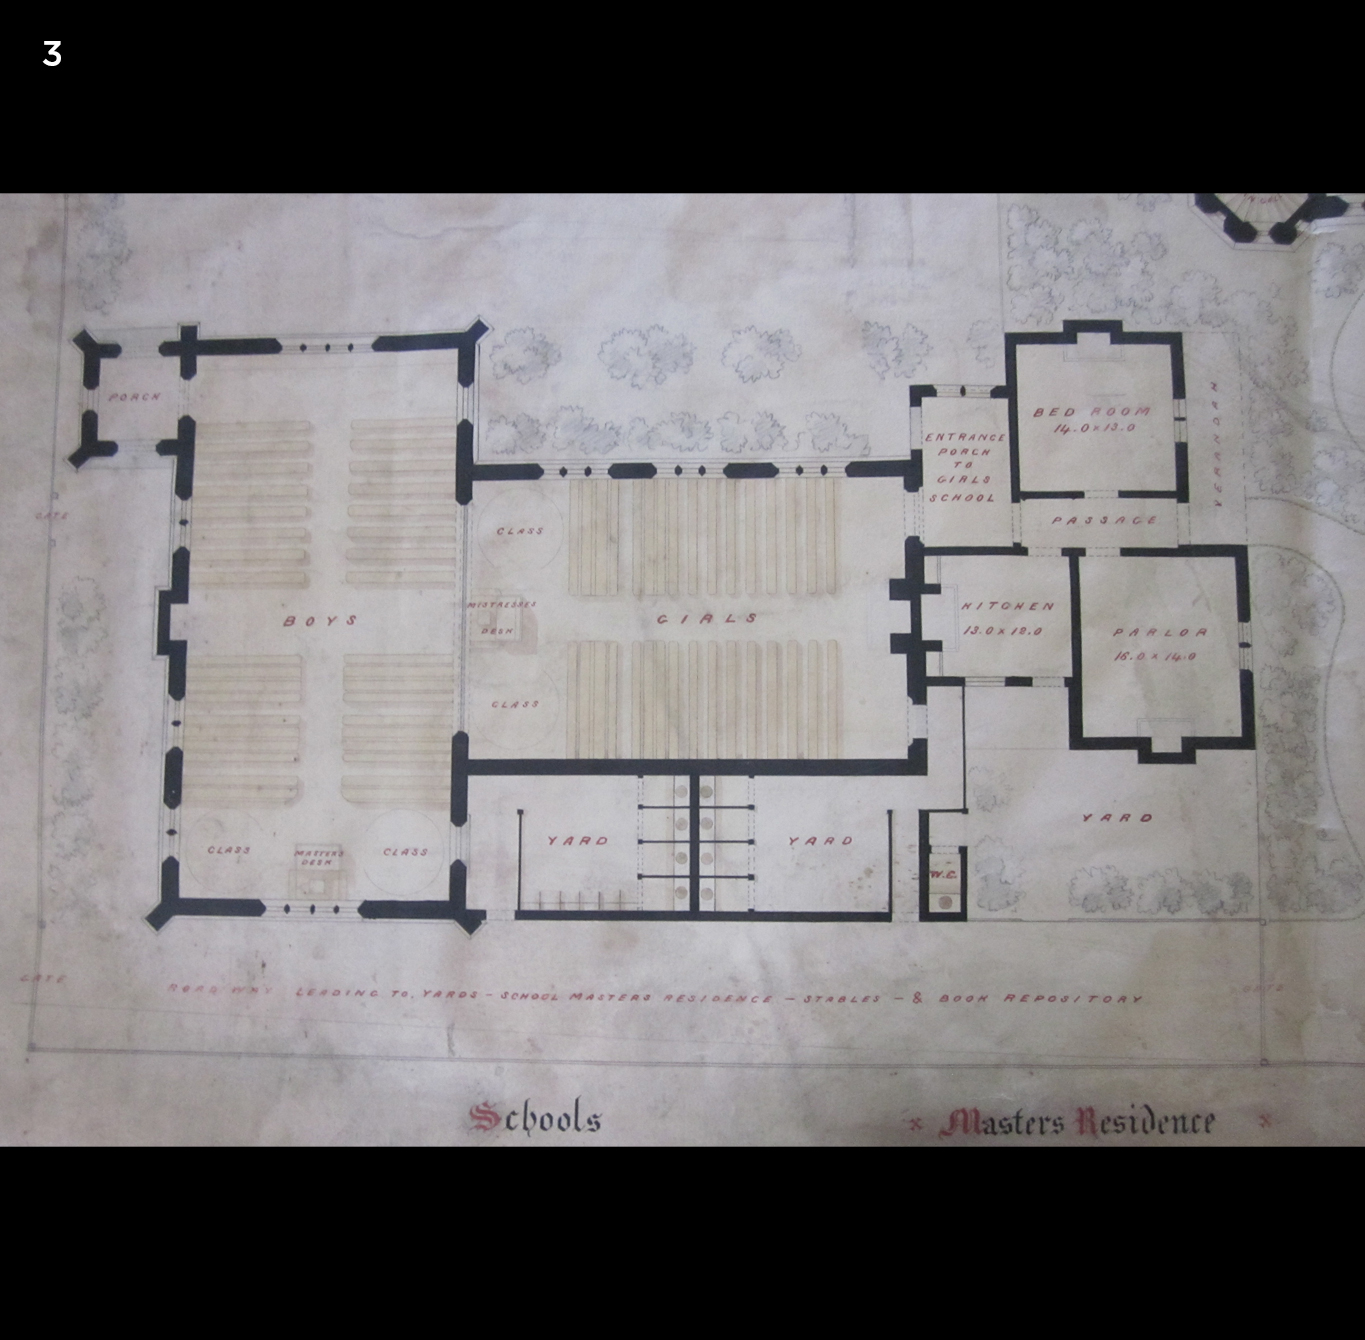 Plan of the School House.